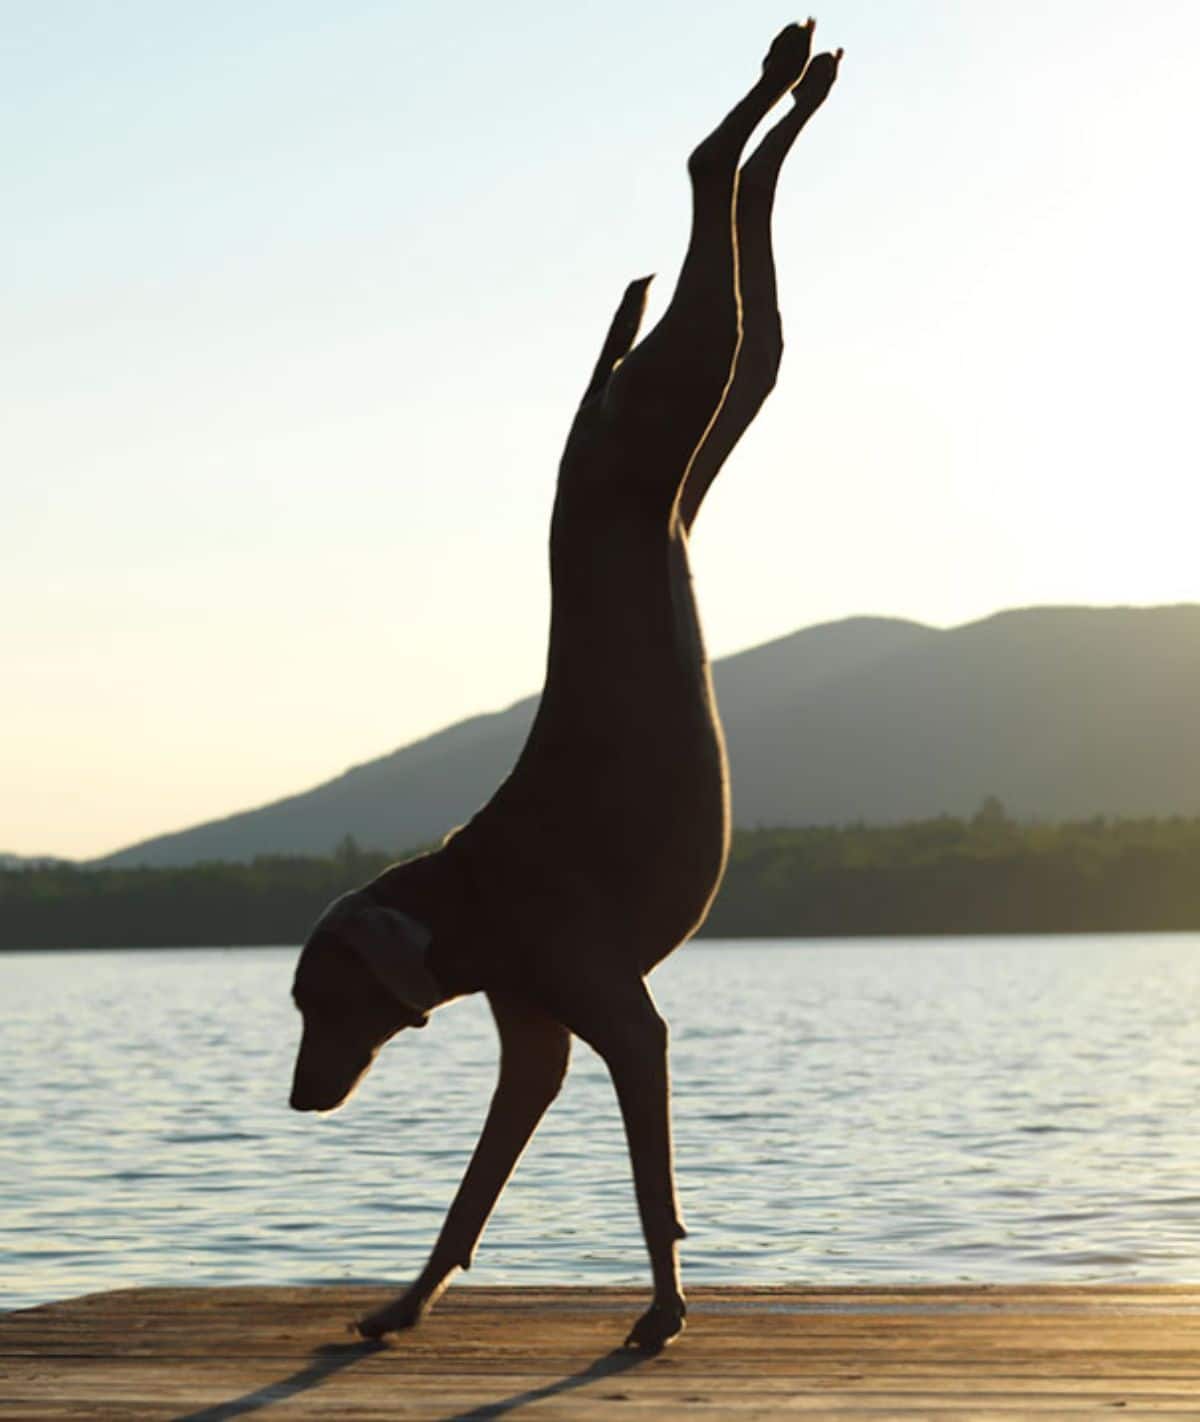 greyhound standing on front legs on a wooden pier by a lake